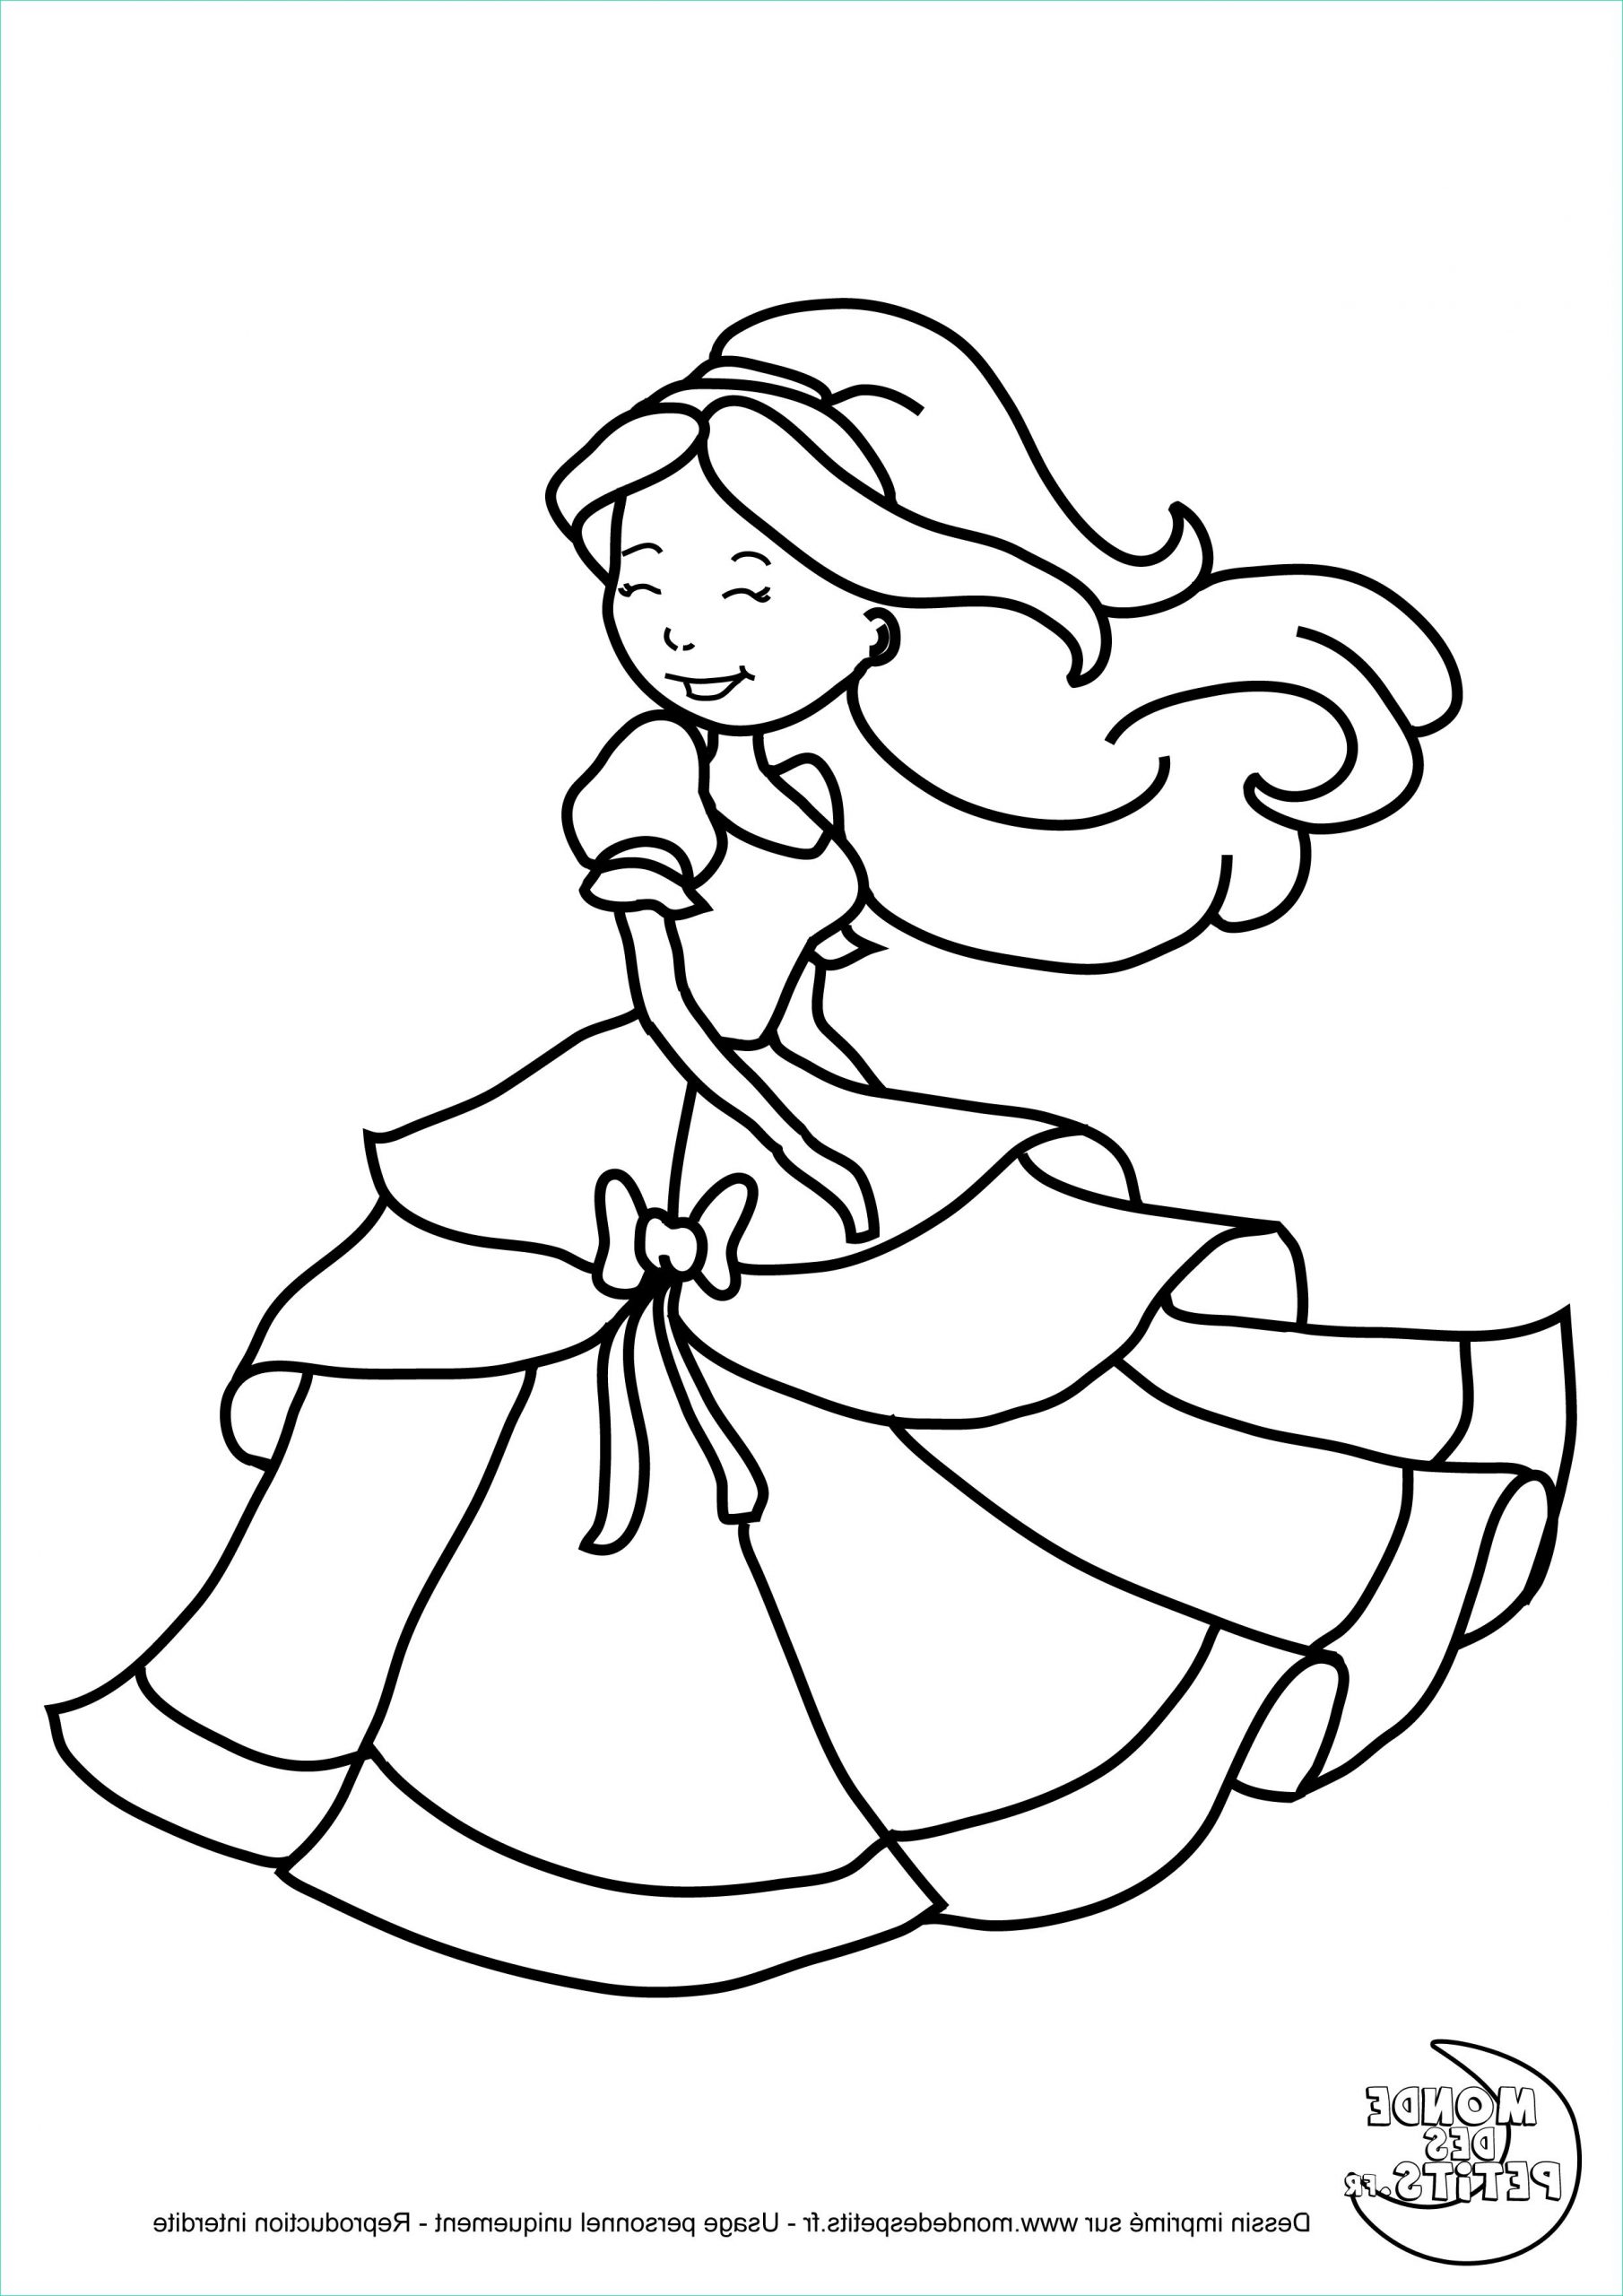 coloriages id=4